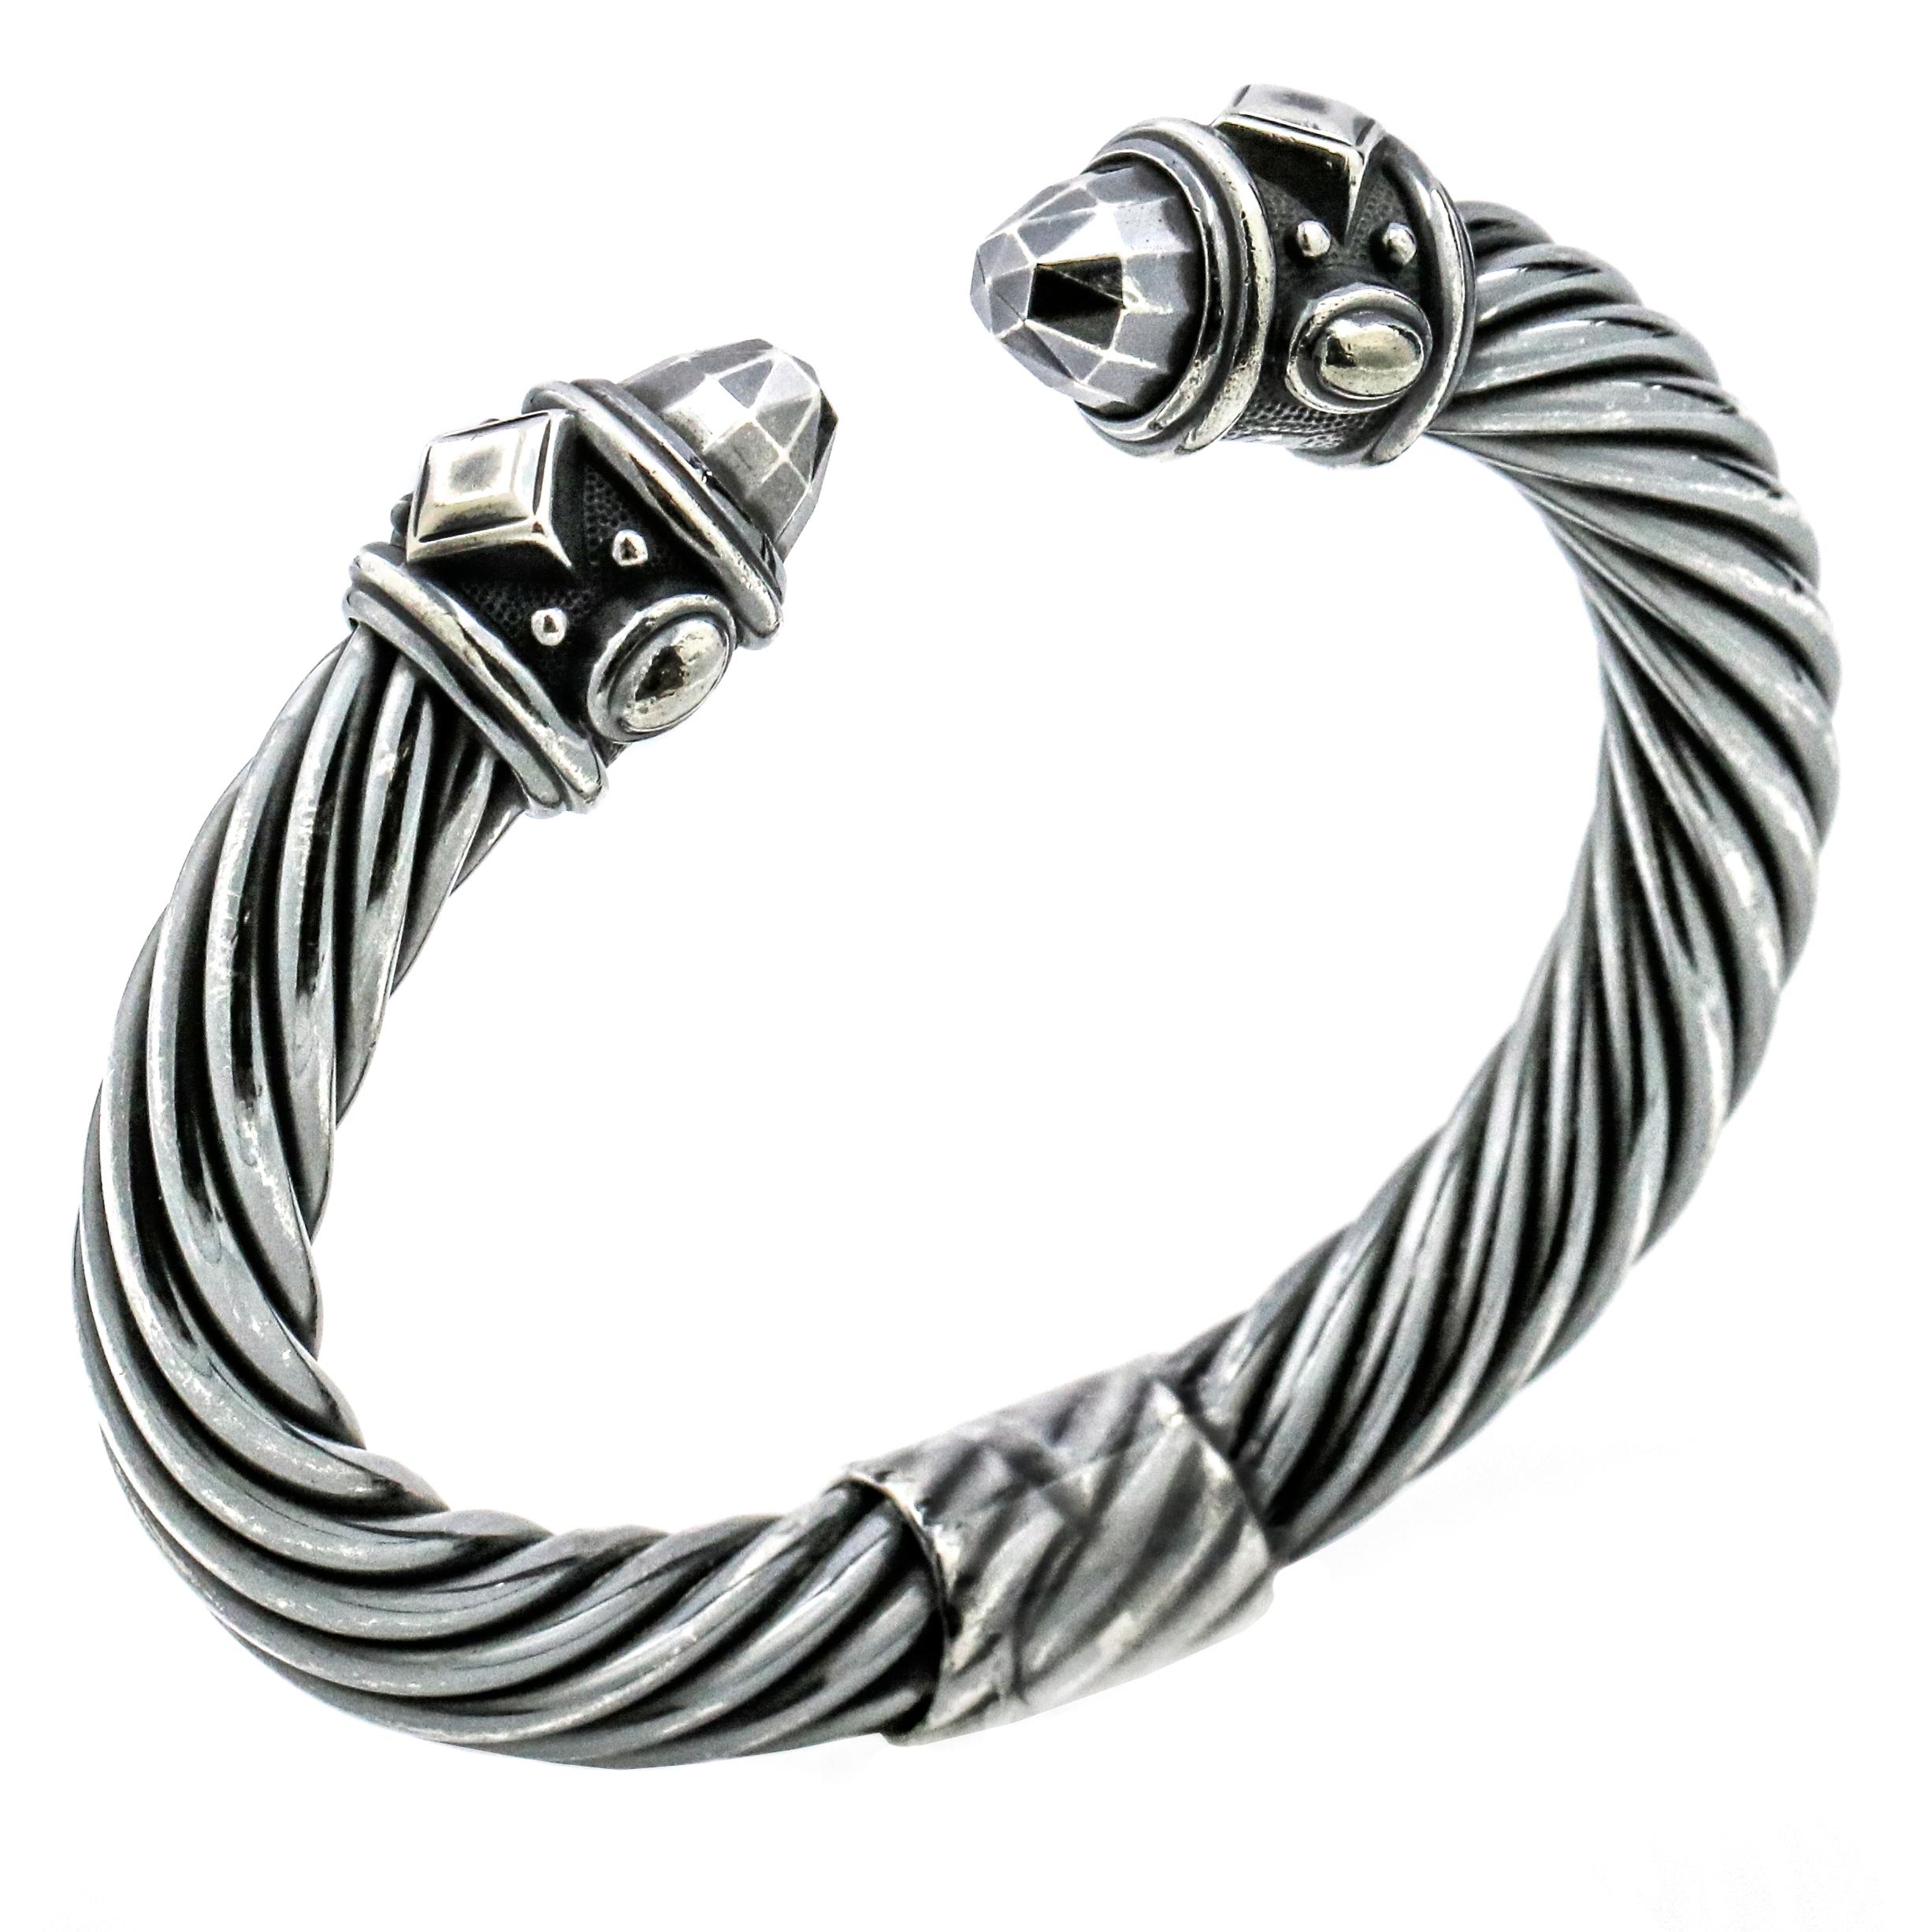 David Yurman renaissance bracelet in darkened sterling silver from the Cable Collection. Hinge opening. Size medium. Retail $990. Current style. Style no.: B11994 SB. Size medium.